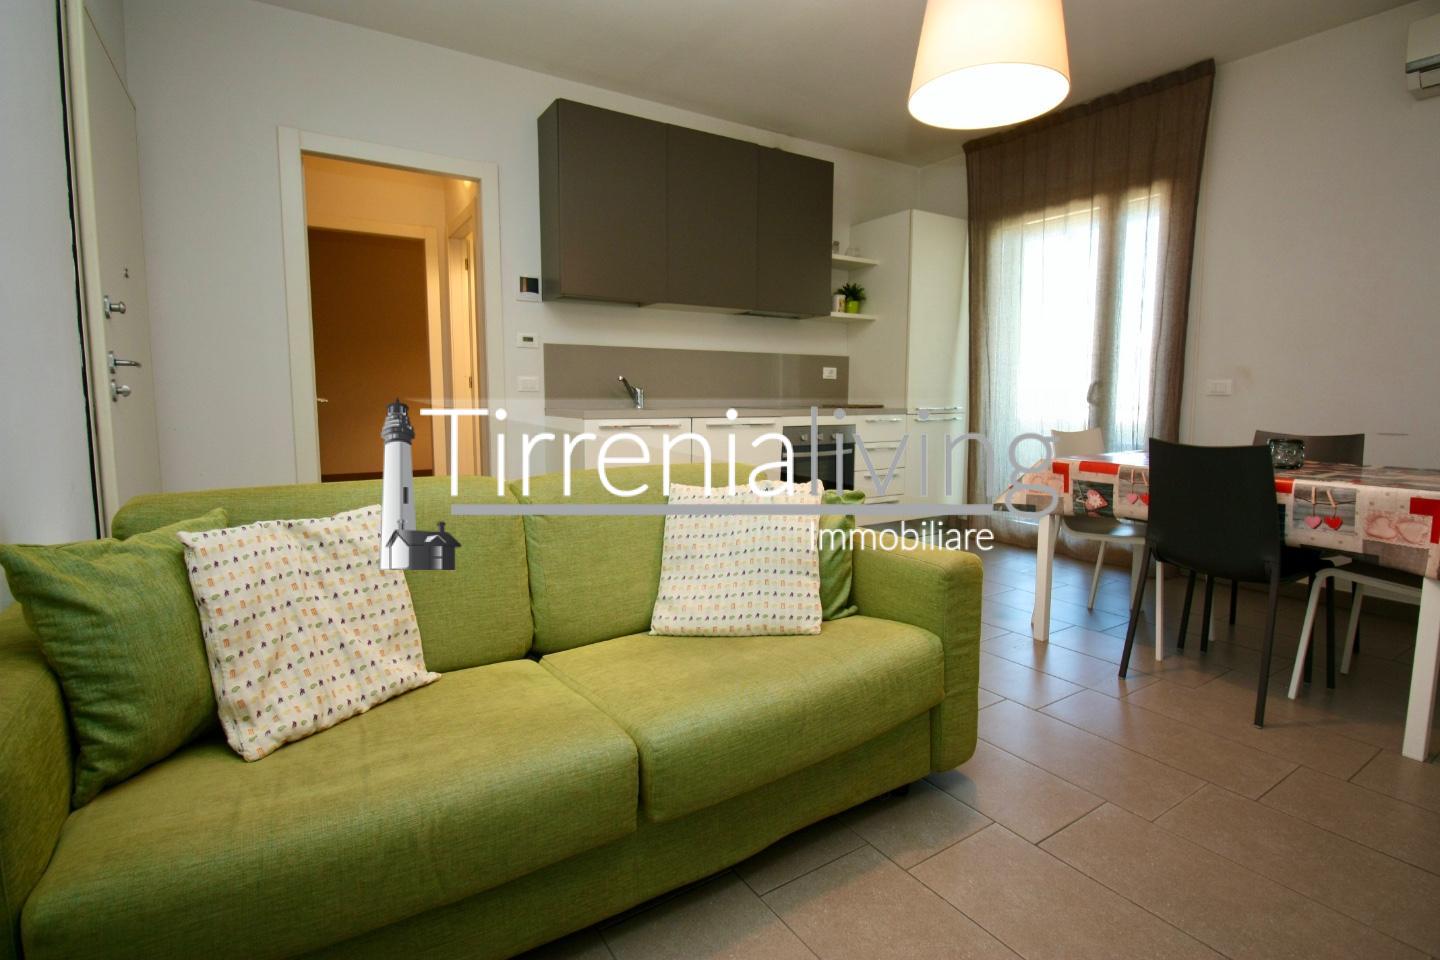 Apartment for holiday rentals, ref. C-356-E